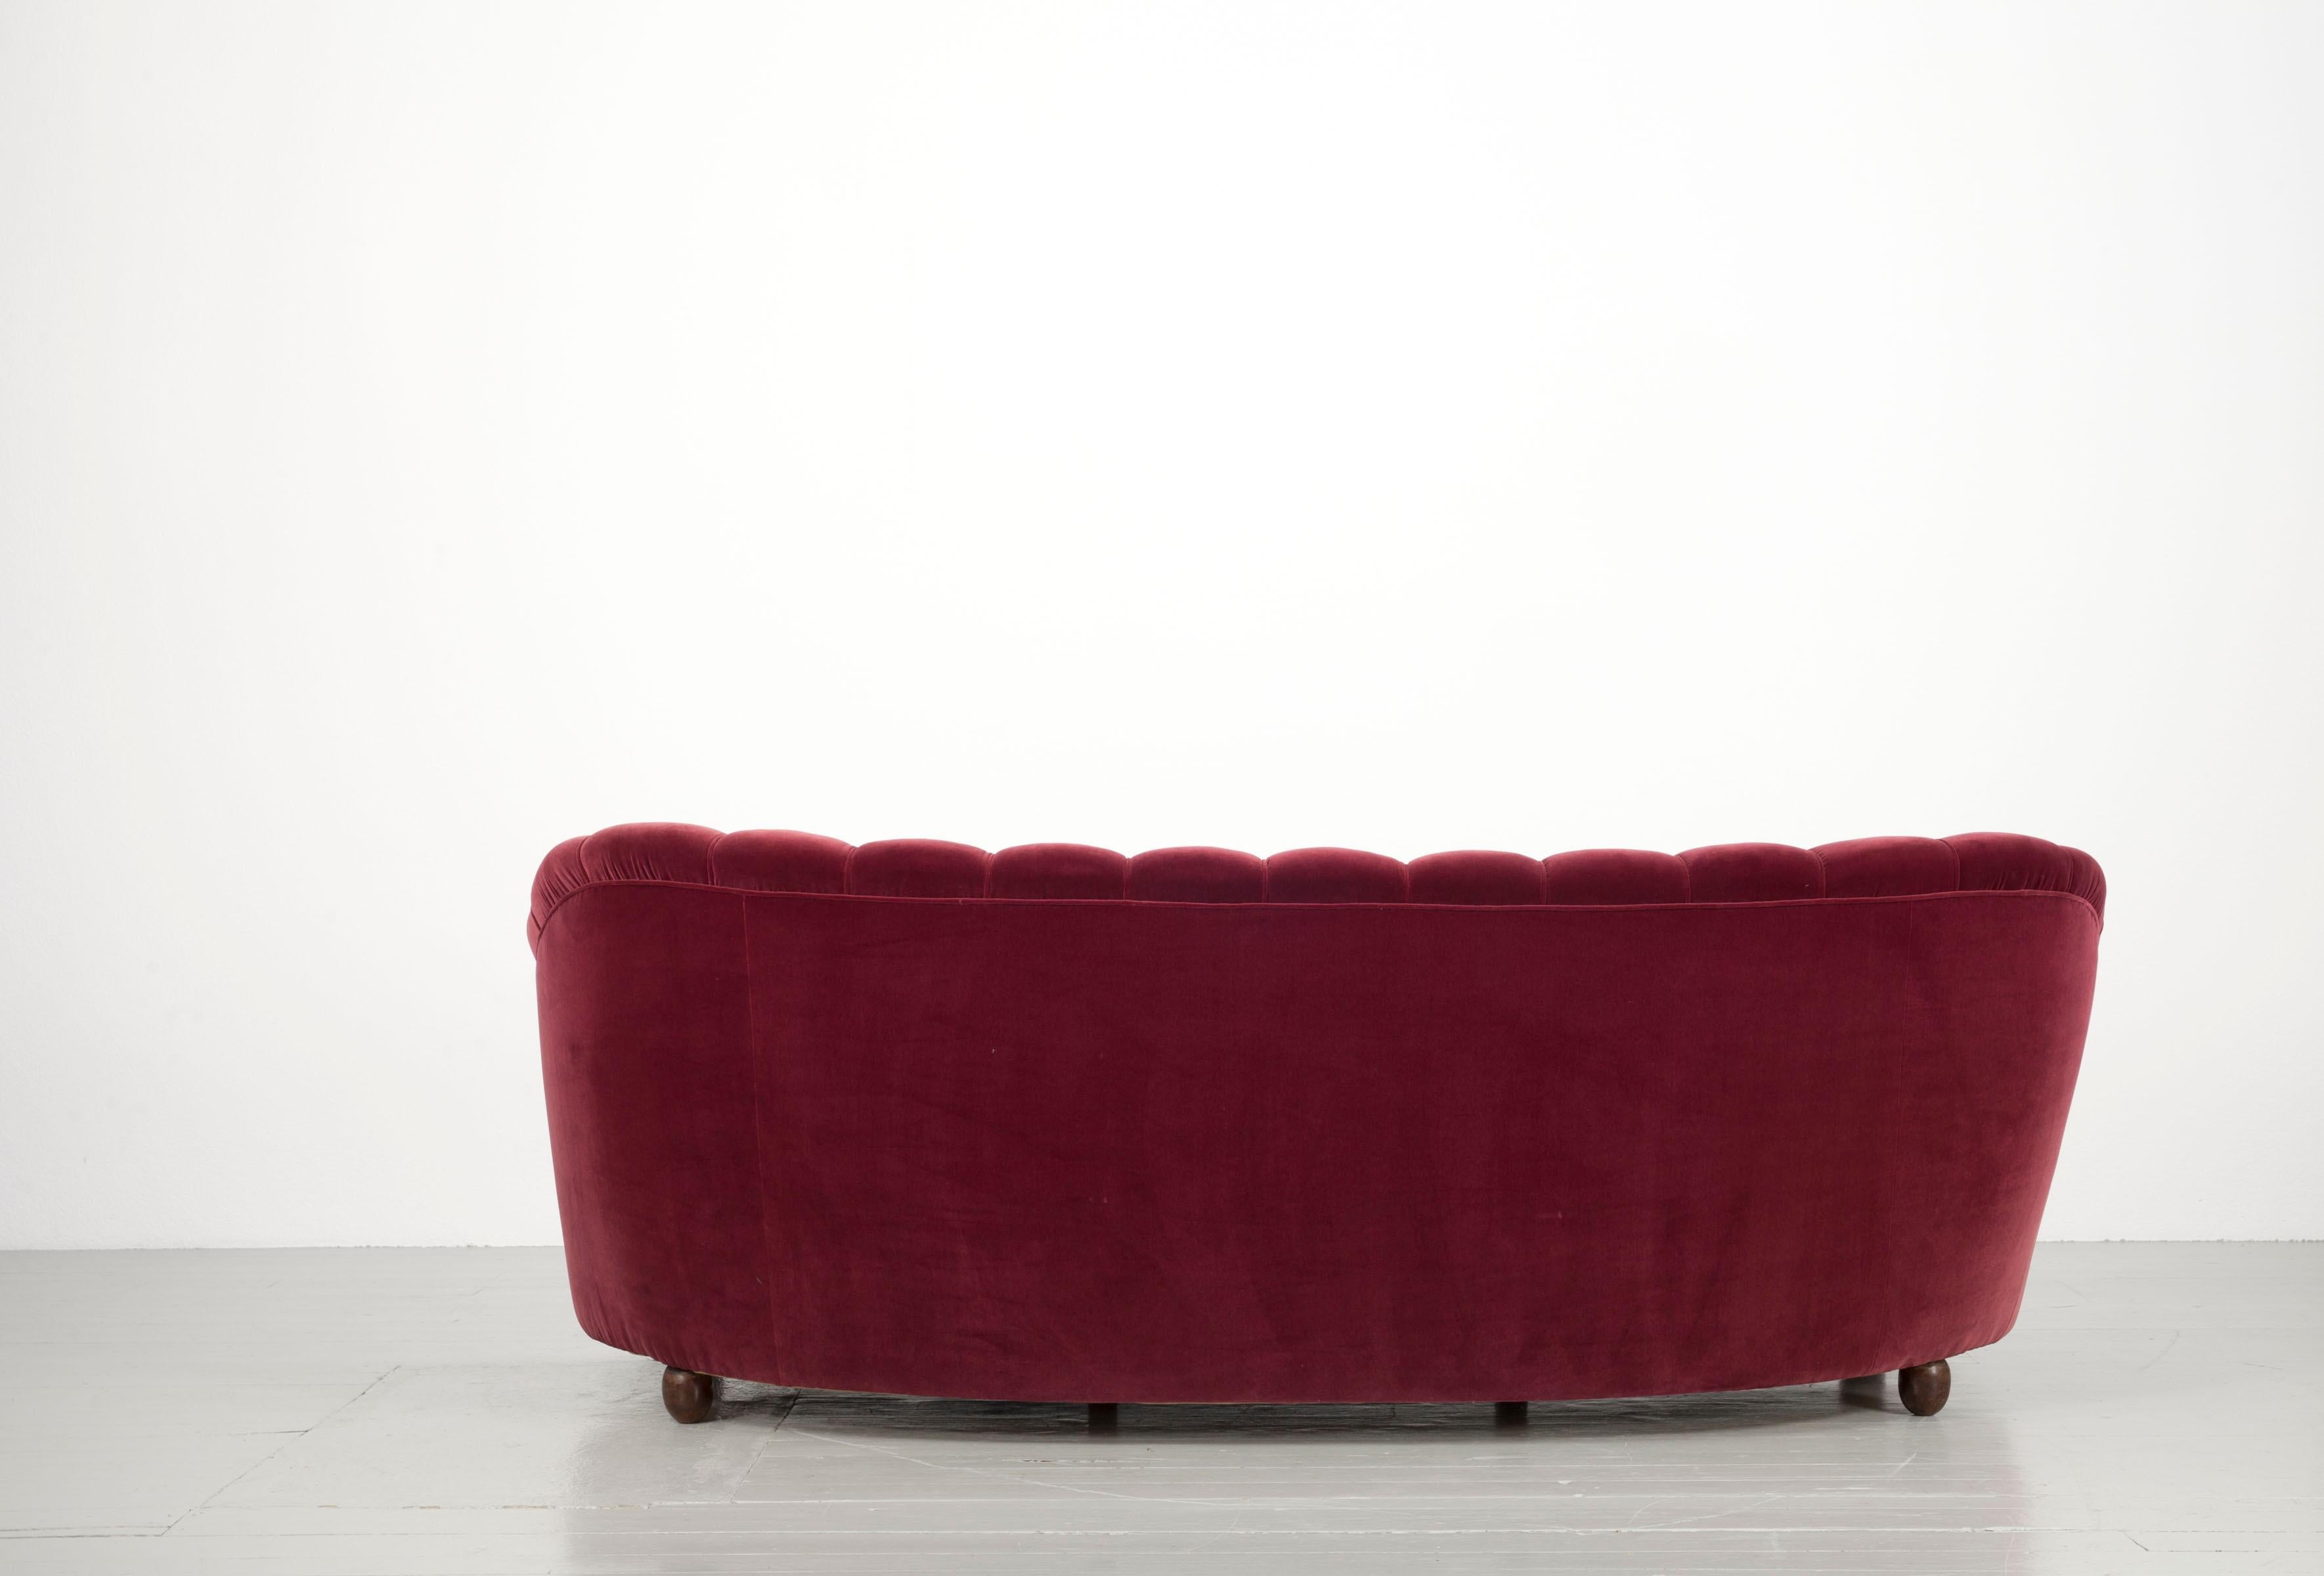 Italian Set of a Massive Sofa and Two Armchairs in Dark Red Velvet Cover, 1940s For Sale 8